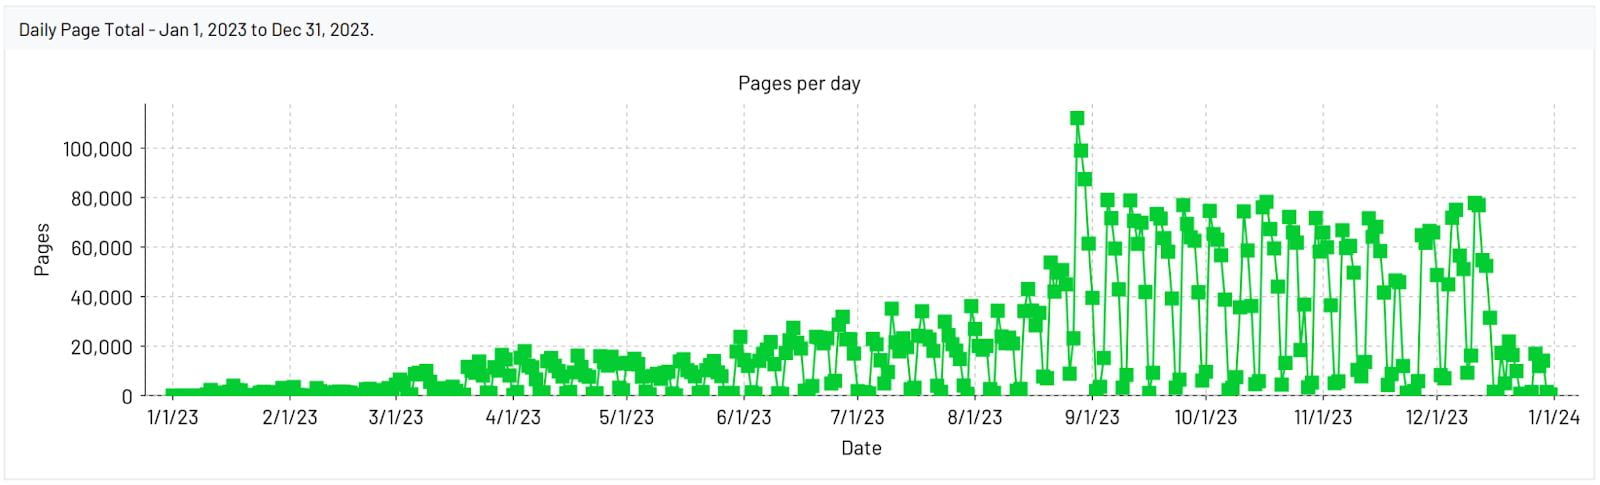 Graph representing the number of pages printed per day. Largest spike is shown during the month of September 2023.